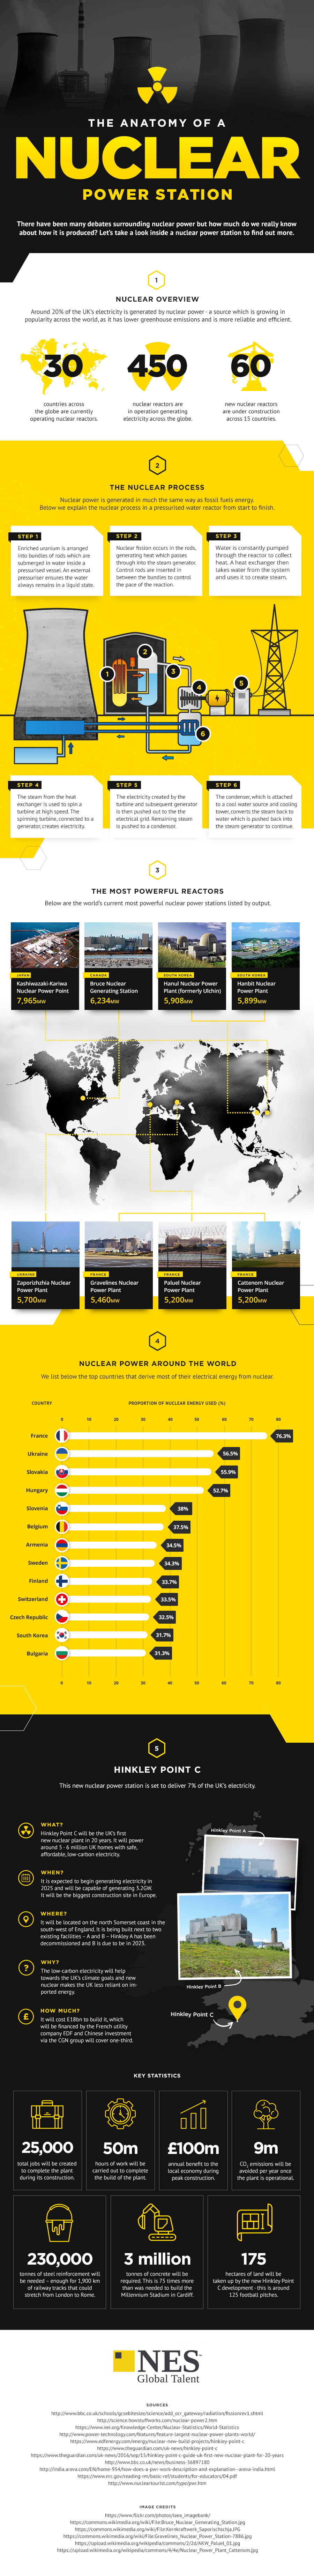 The Anatomy of a Nuclear Power Station